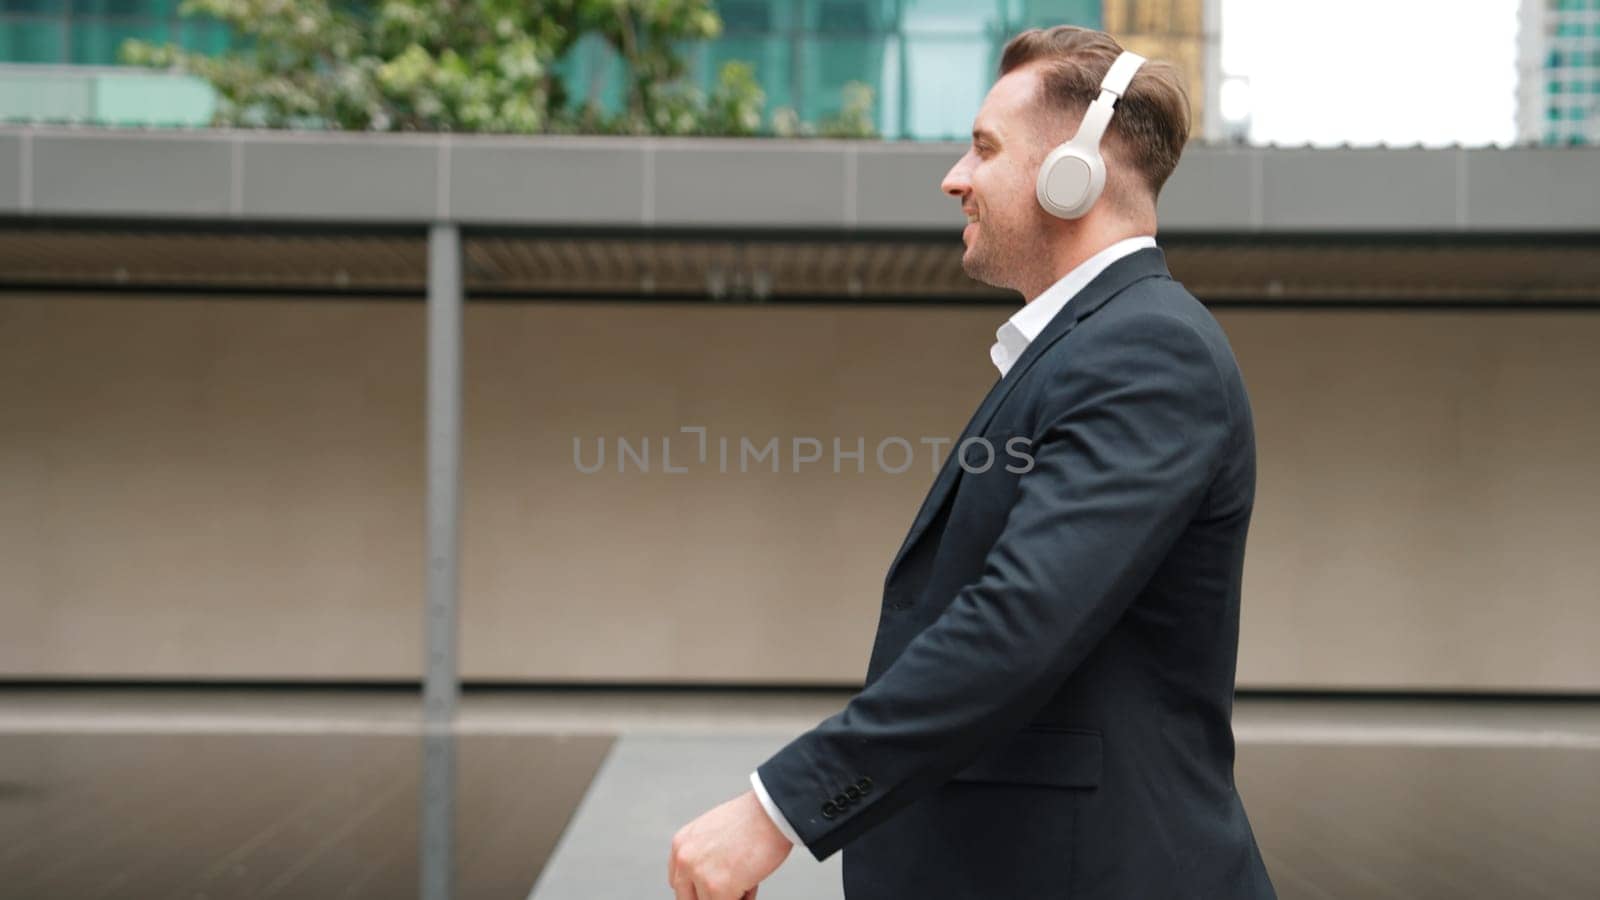 Project manager with headphone walking workplace while moving to music. Urbane. by biancoblue